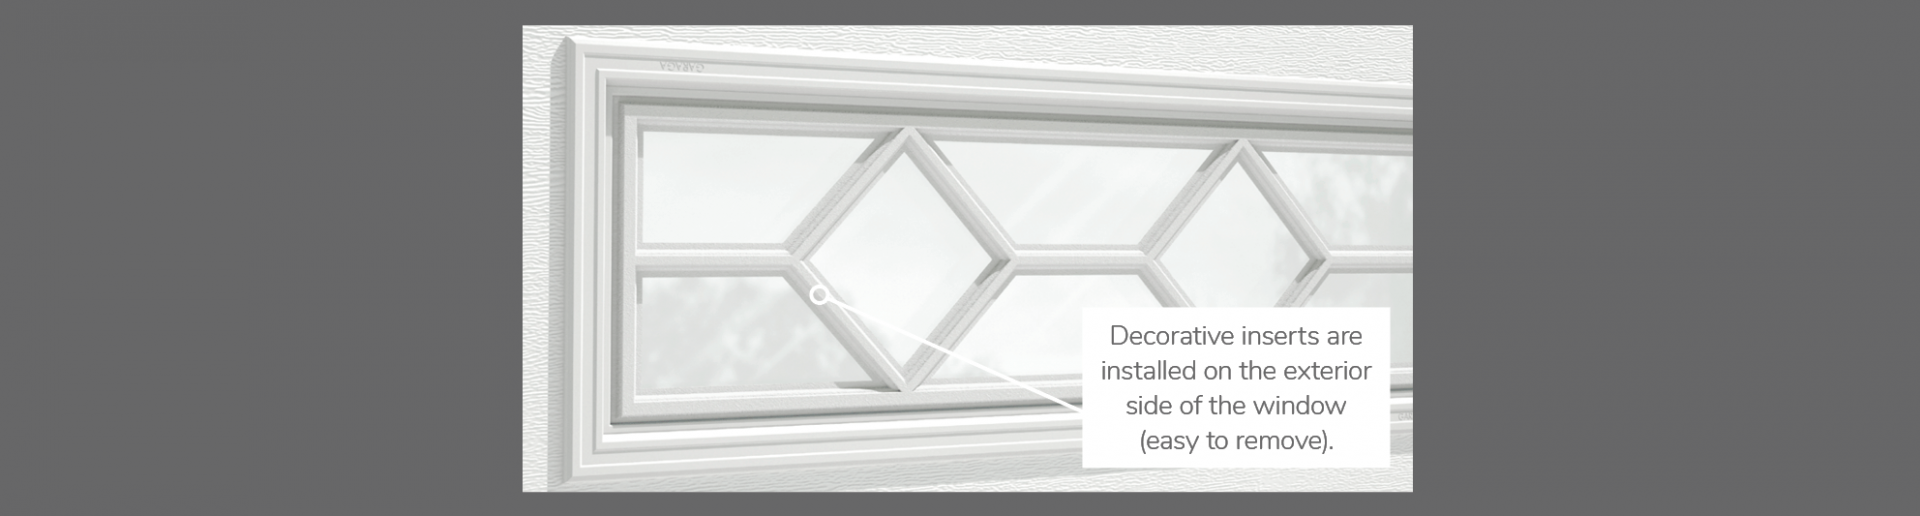 Waterton Decorative Insert, 40" x 13" or 41" x 16", available for door R-16, R-12, 3 layers - Polystyrene, 2 layers - Polystyrene and Non-insulated